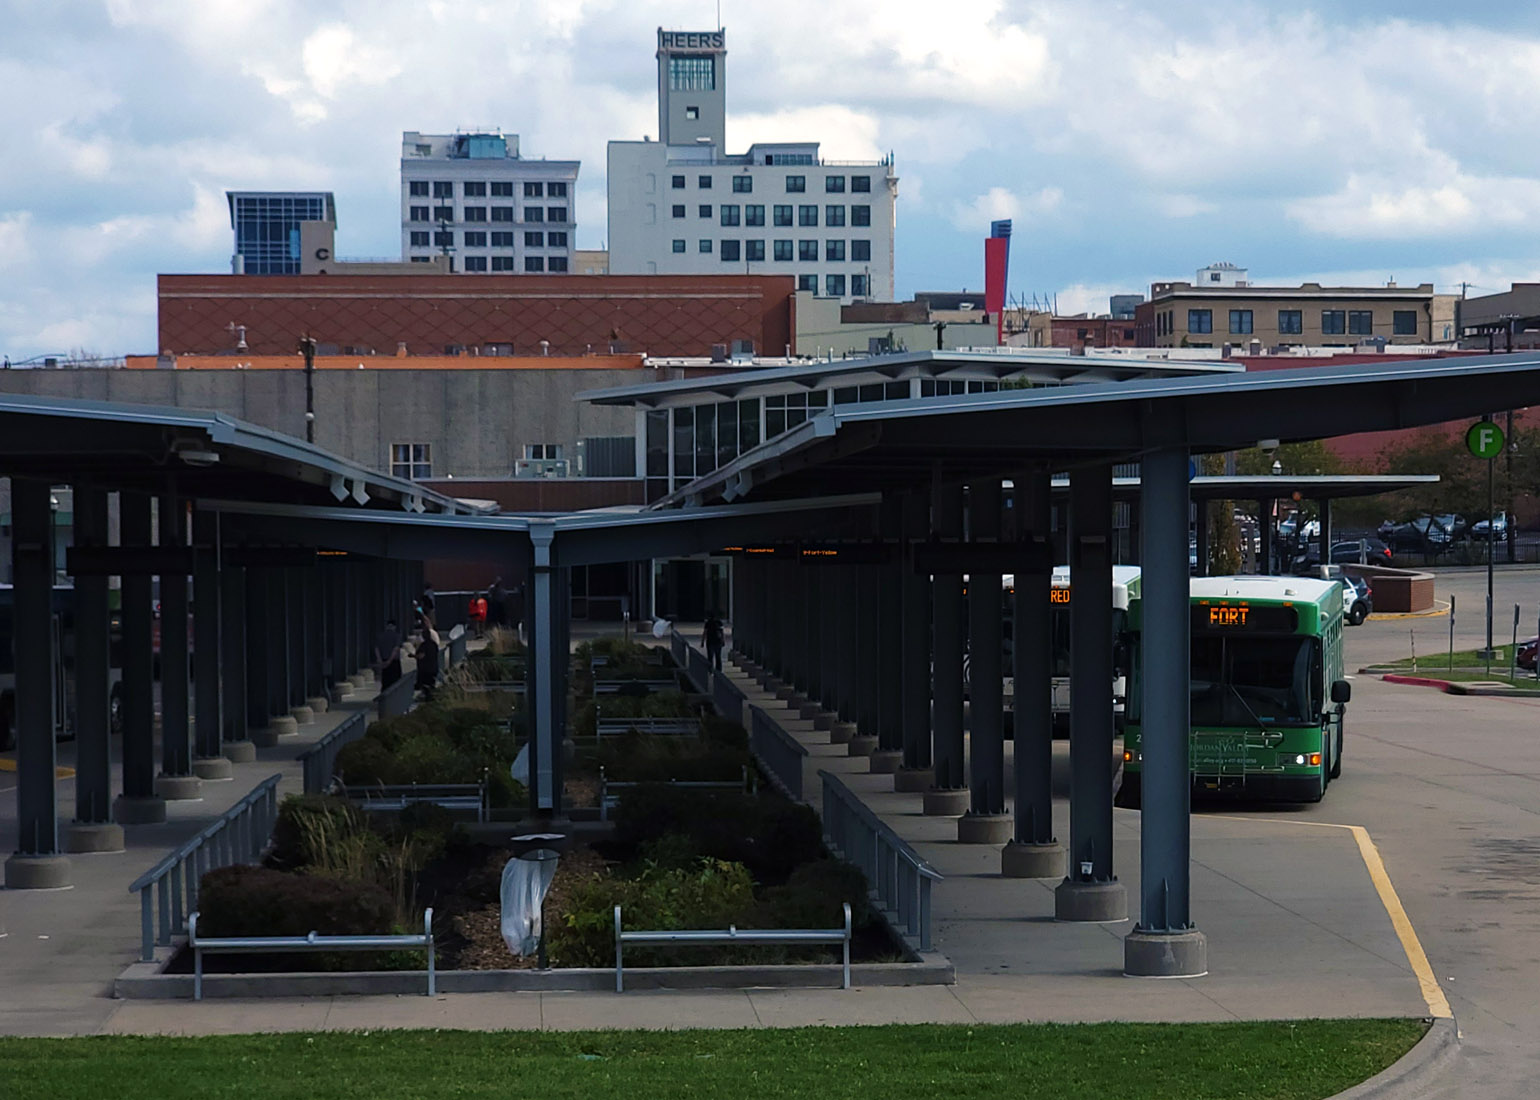 Bus Station in downtown Springfield